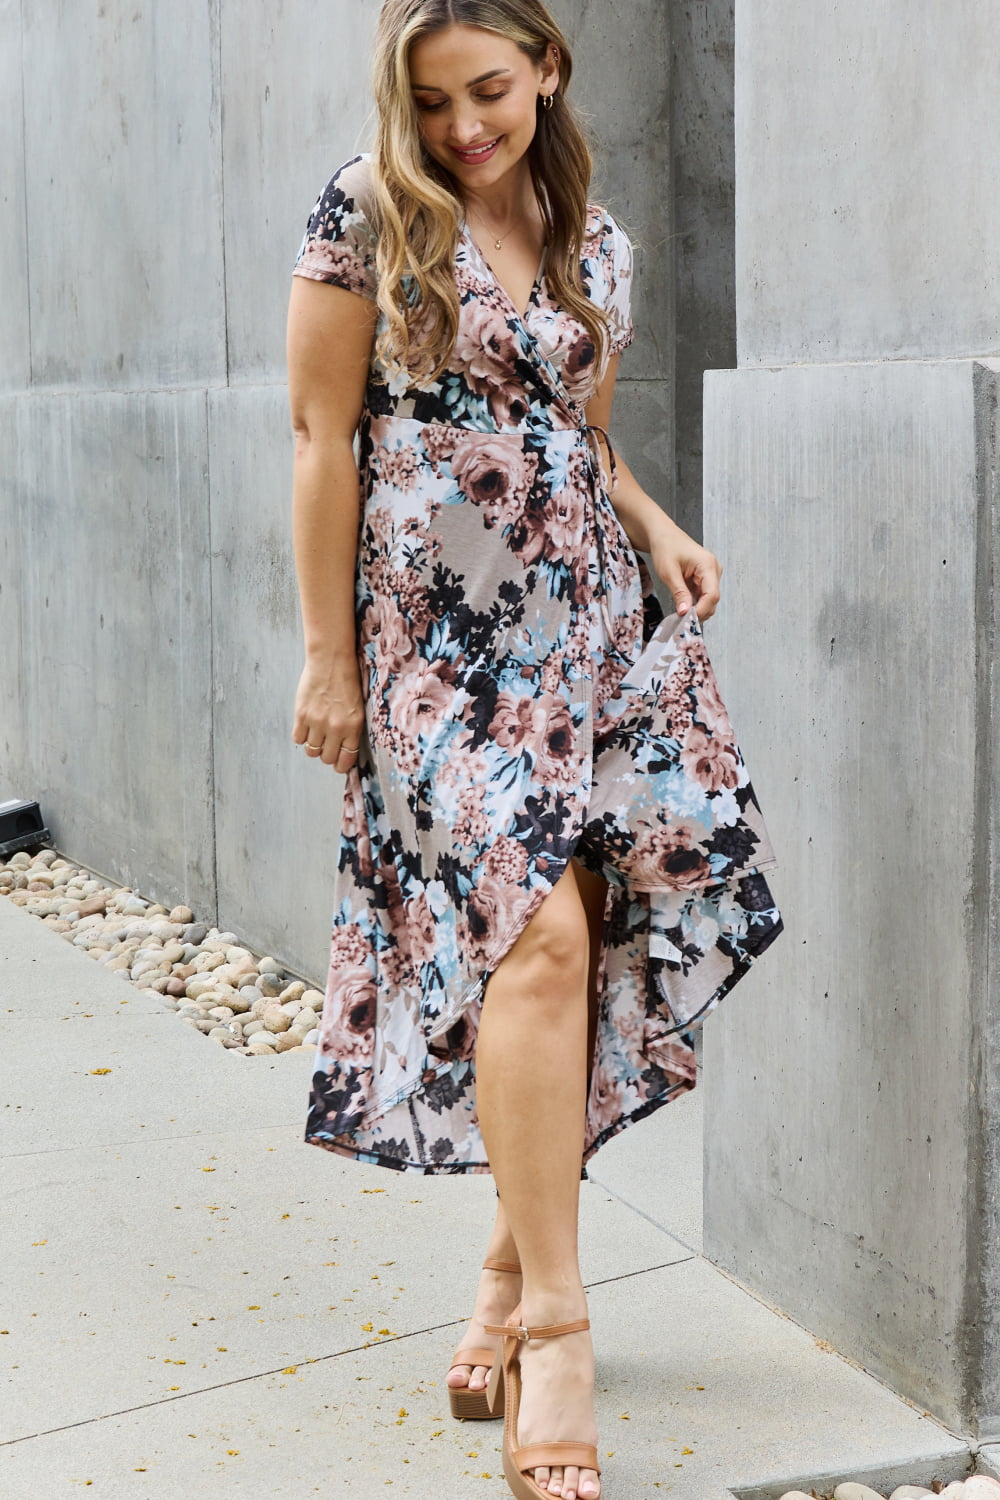 Give Me Roses Full Size Floral Maxi Wrap Dress - All Dresses - Dresses - 6 - 2024